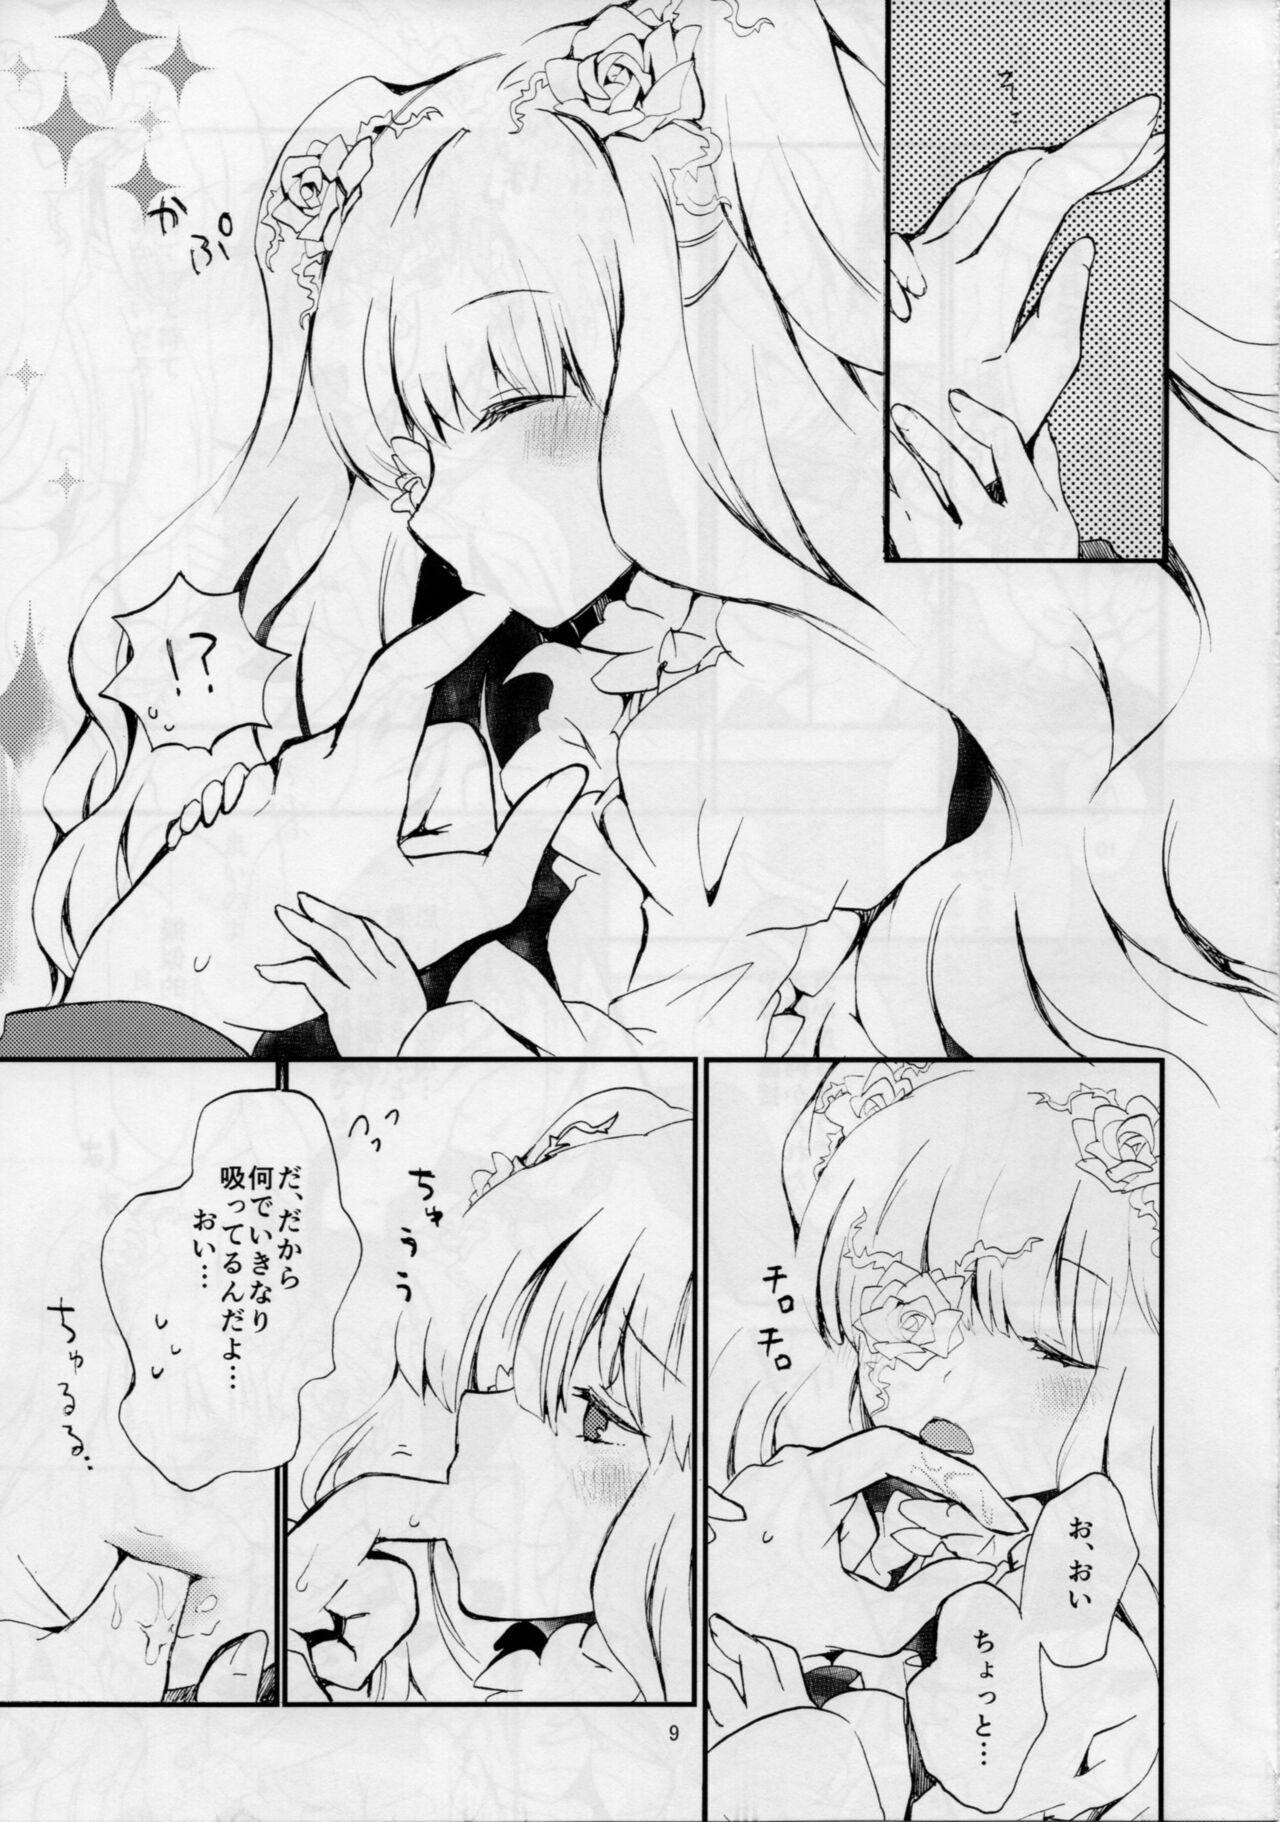 Free 18 Year Old Porn Eat me, Drink me - Rozen maiden Bigboobs - Page 6